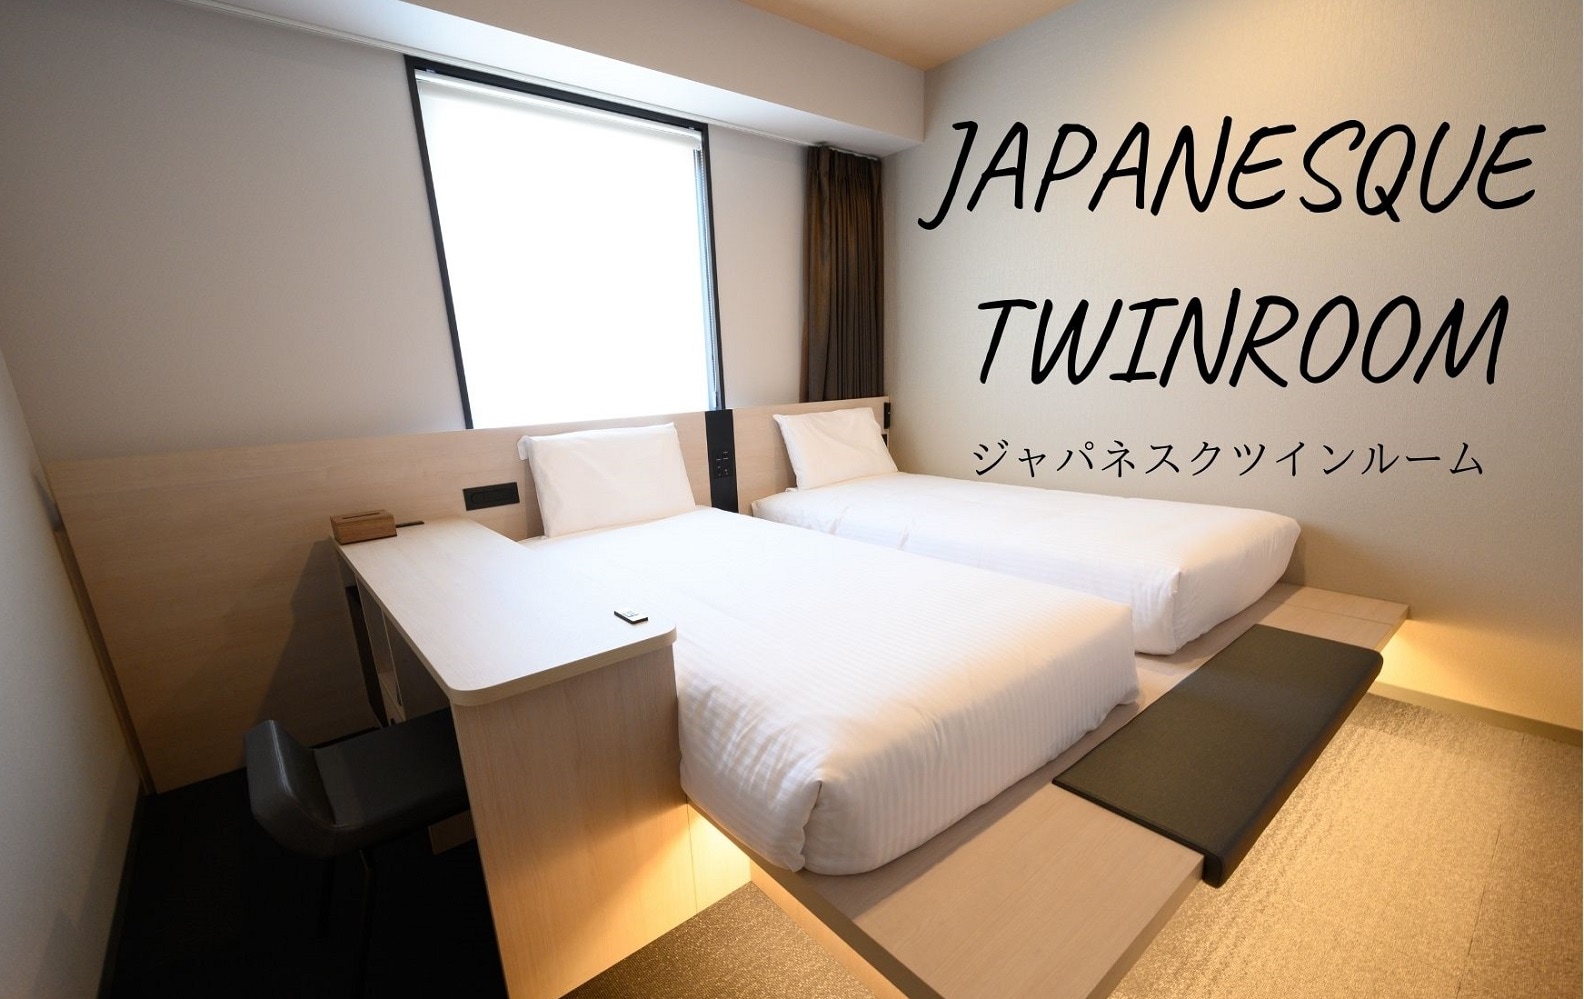 Japanesque Twin Room [☆ Safe for children to sleep with ☆ Mattress on a small rise]